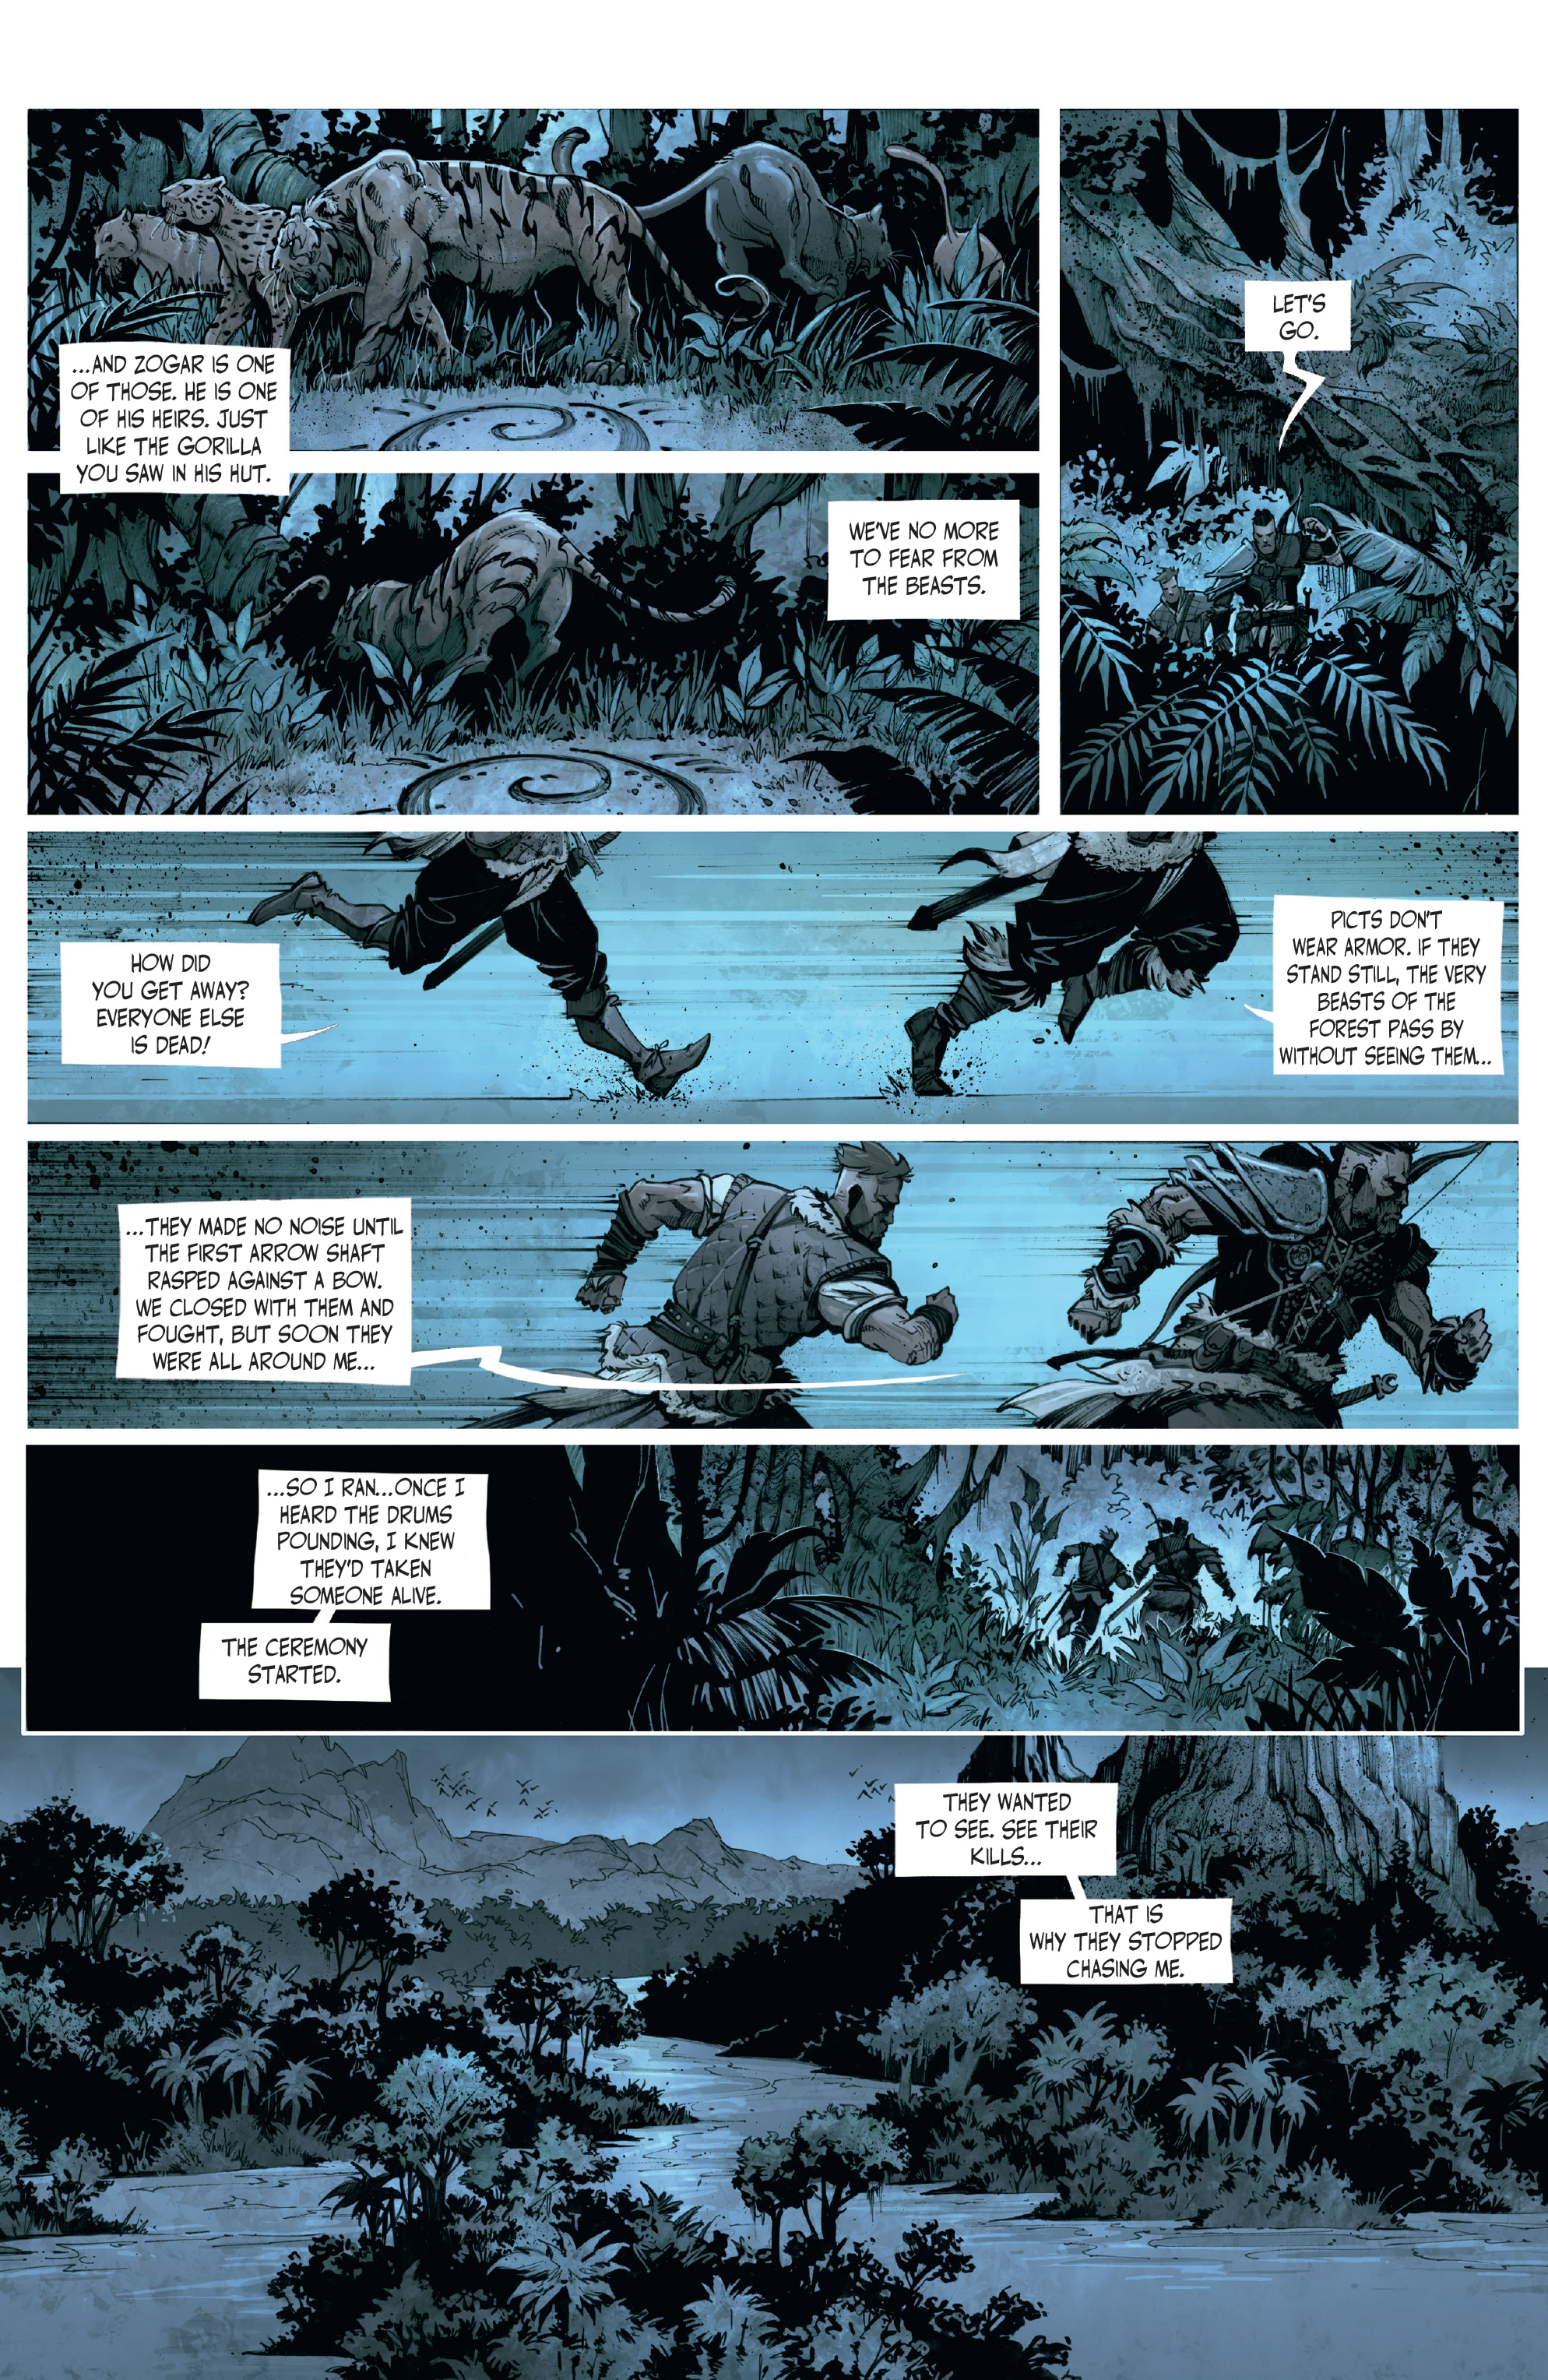 The Cimmerian: Beyond the Black River (2021-): Chapter 2 - Page 5